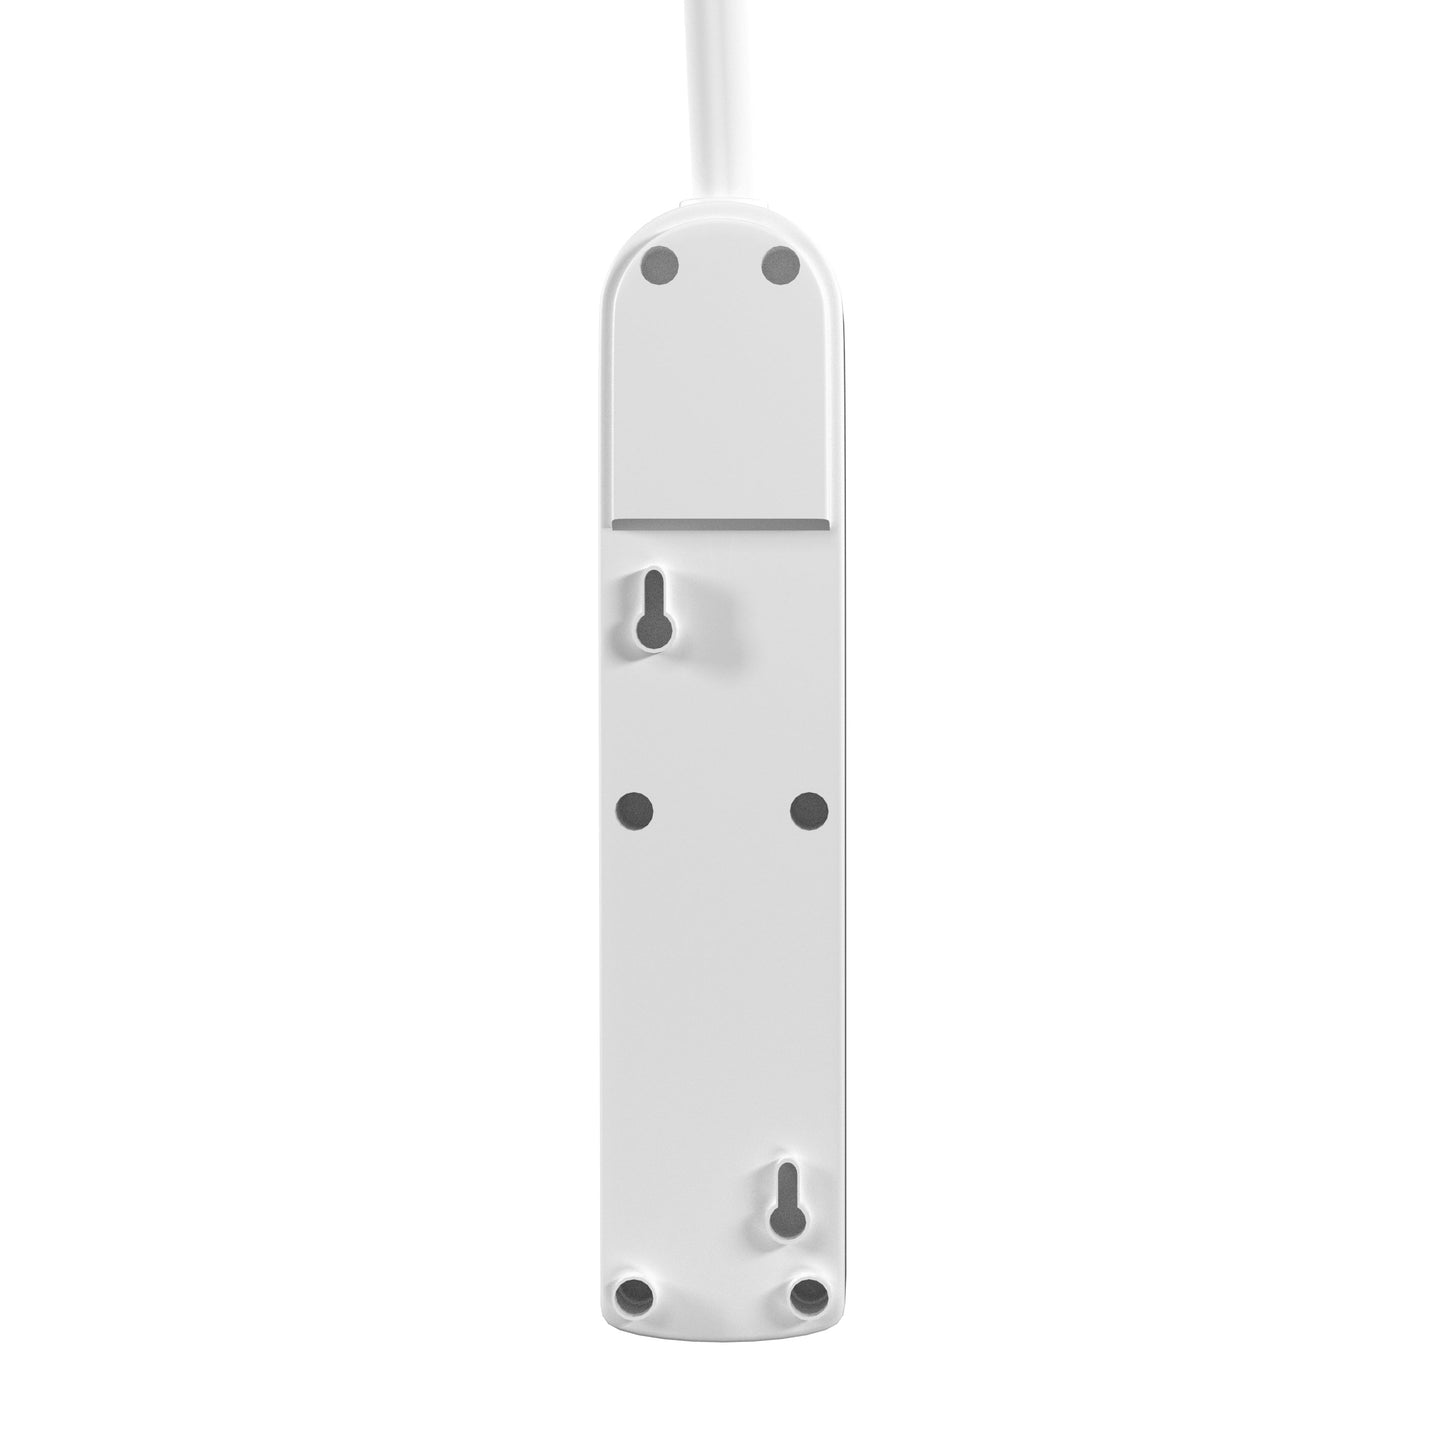 ONE Products 4 Outlet Power Strip with 2 Foot Extension Cord (PS401)